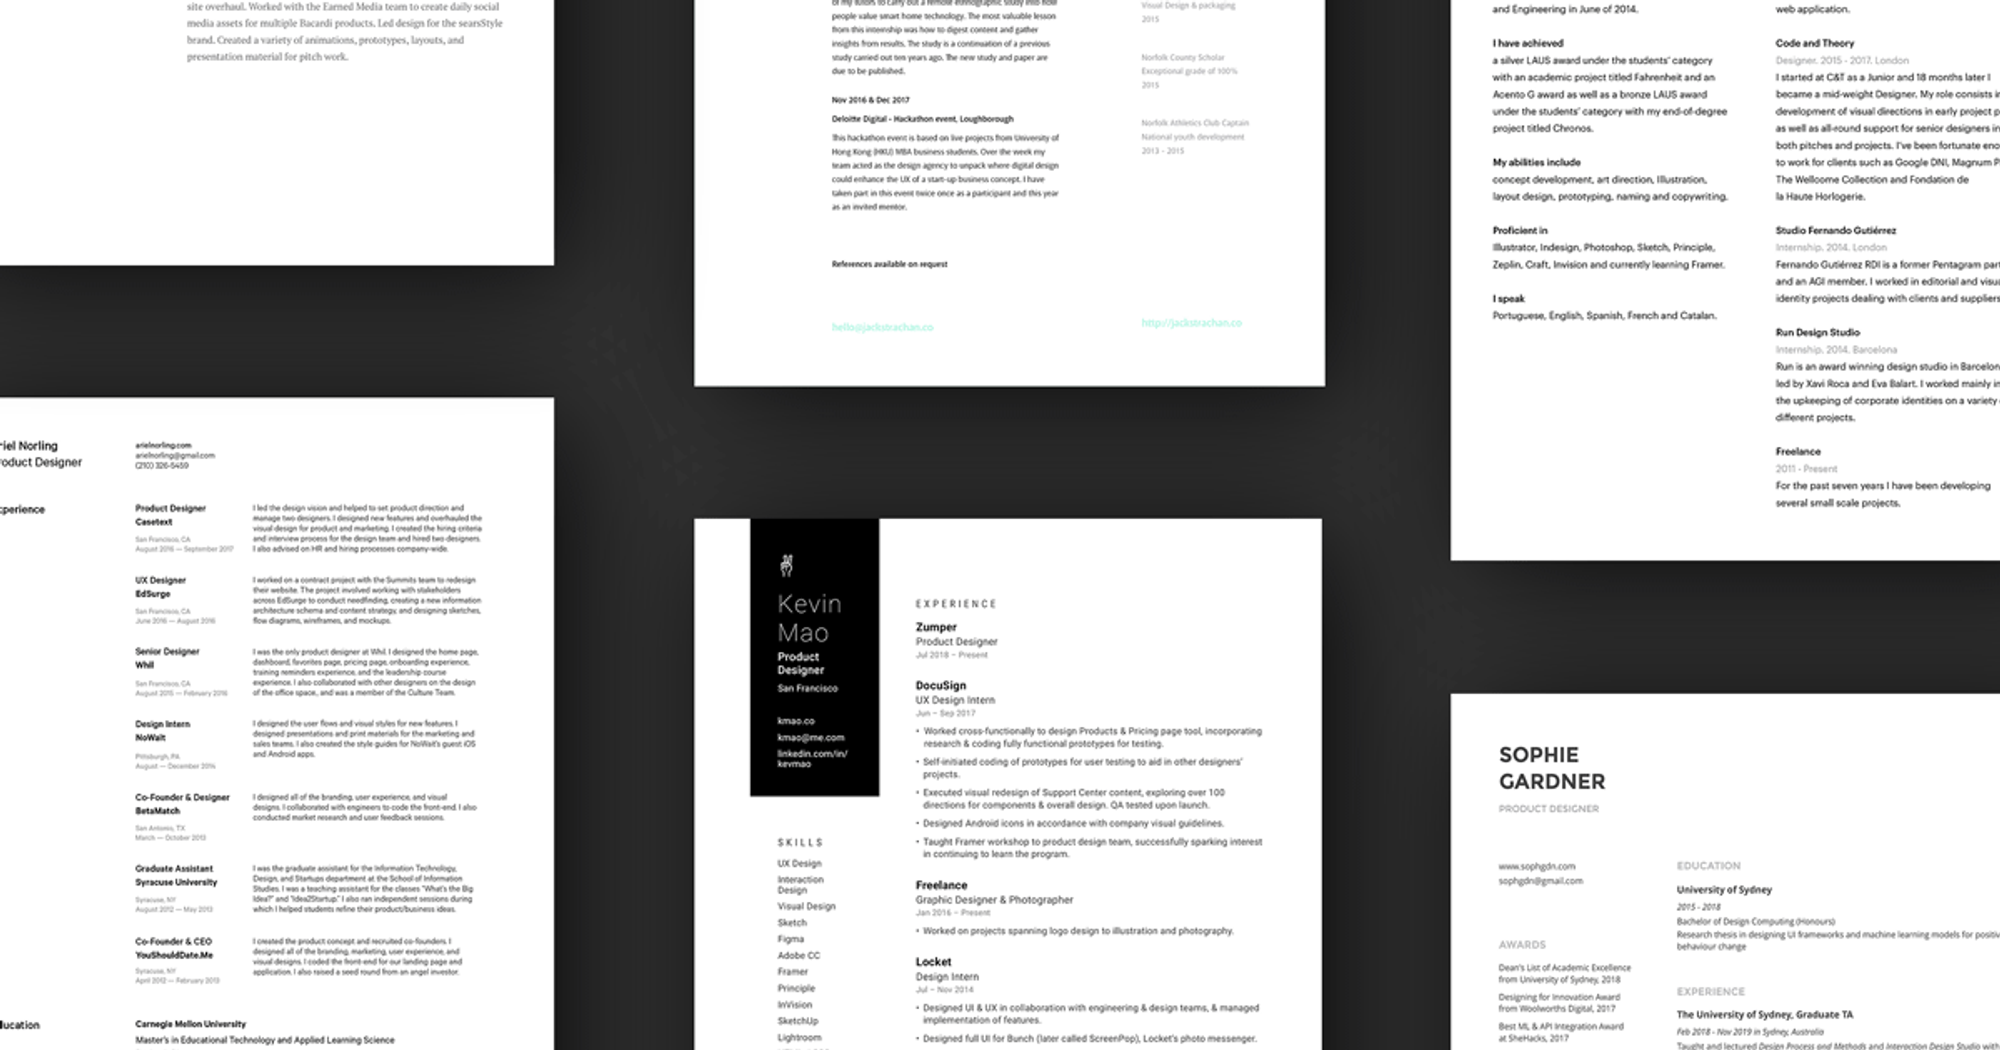 Journal - 21 Inspiring UX Designer Resumes and Why They Work